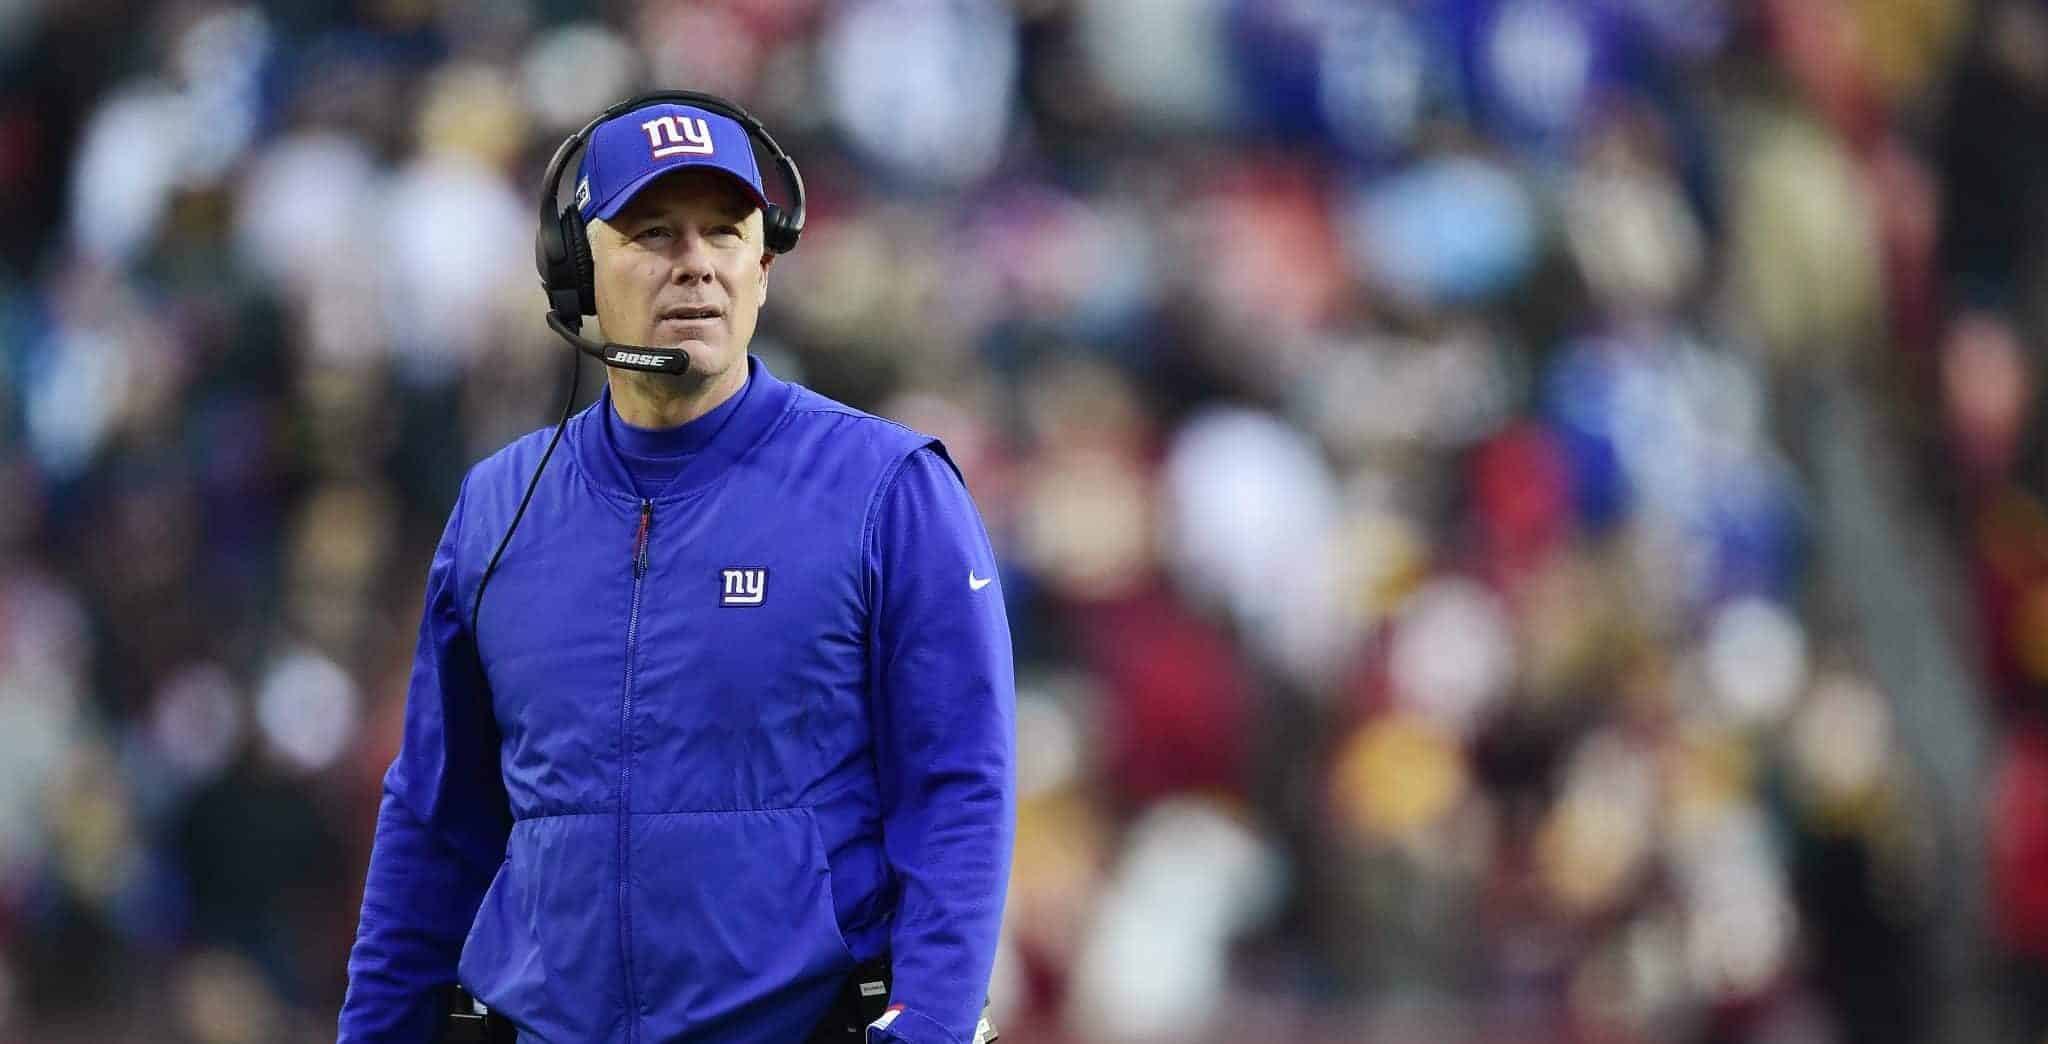 LANDOVER, MD - DECEMBER 22: Head coach Pat Shurmur of the New York Giants looks on from the sideline in the second half against the Washington Redskins at FedExField on December 22, 2019 in Landover, Maryland.